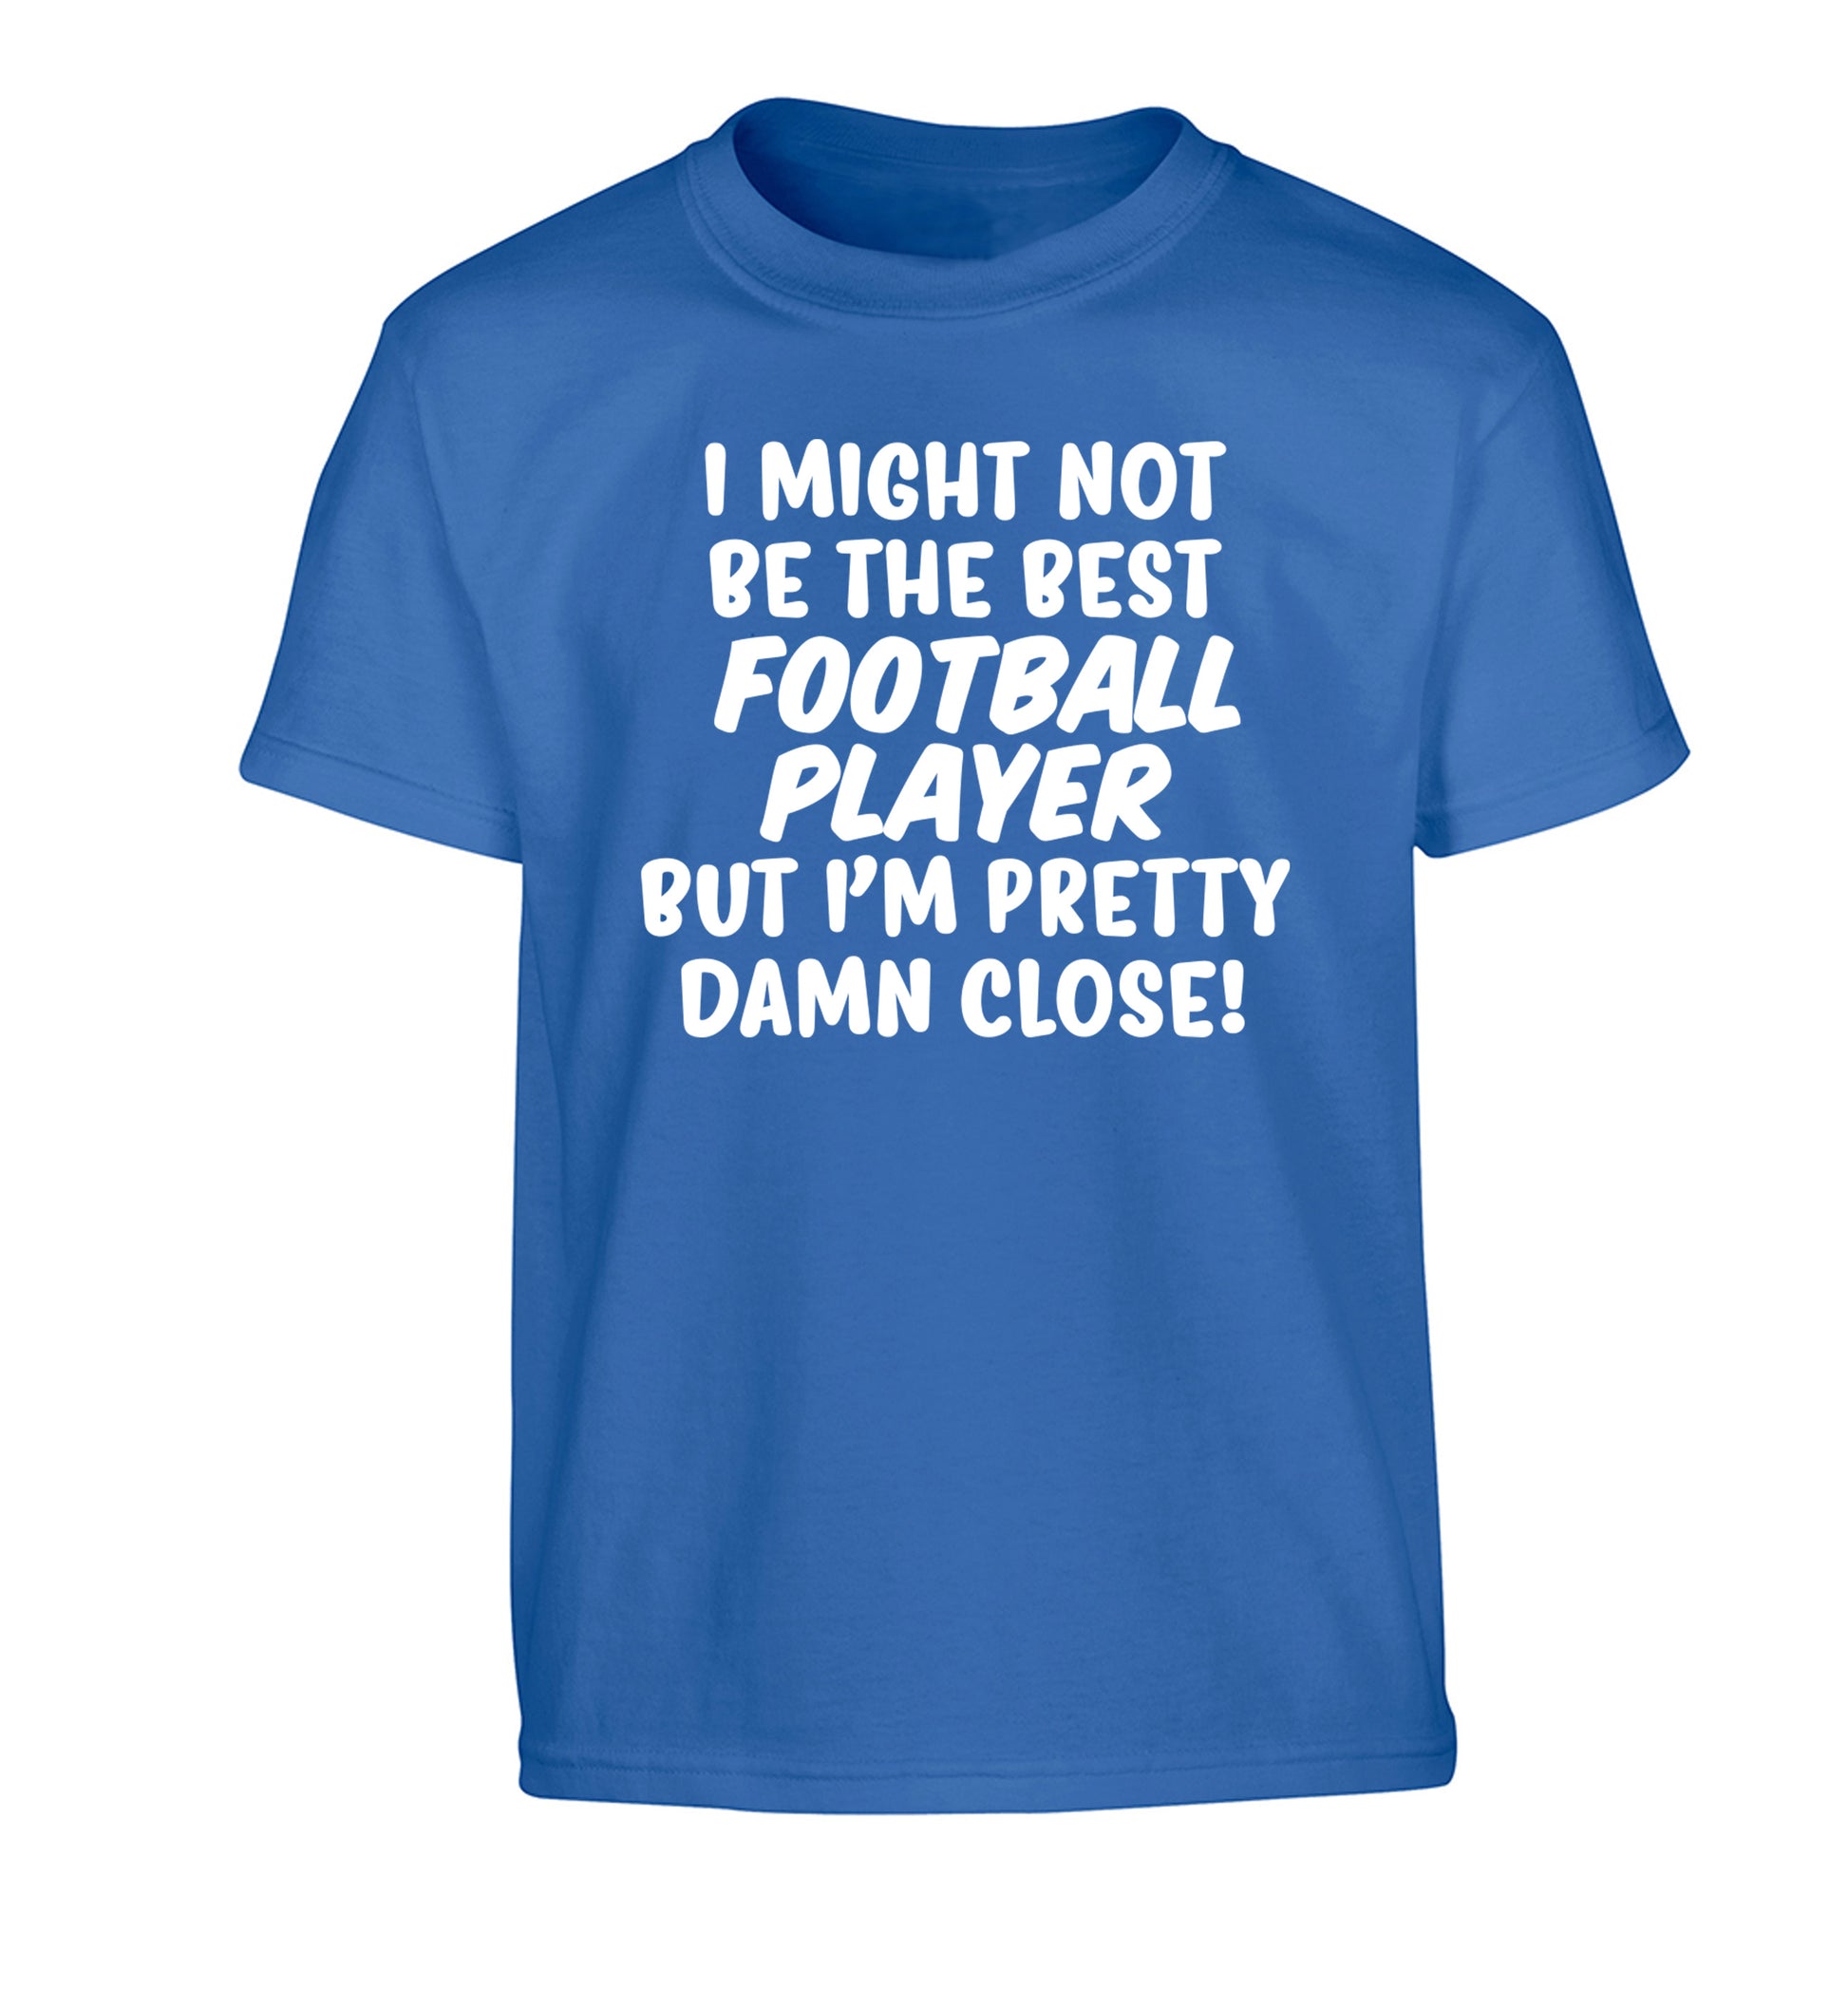 I might not be the best football player but I'm pretty close! Children's blue Tshirt 12-14 Years